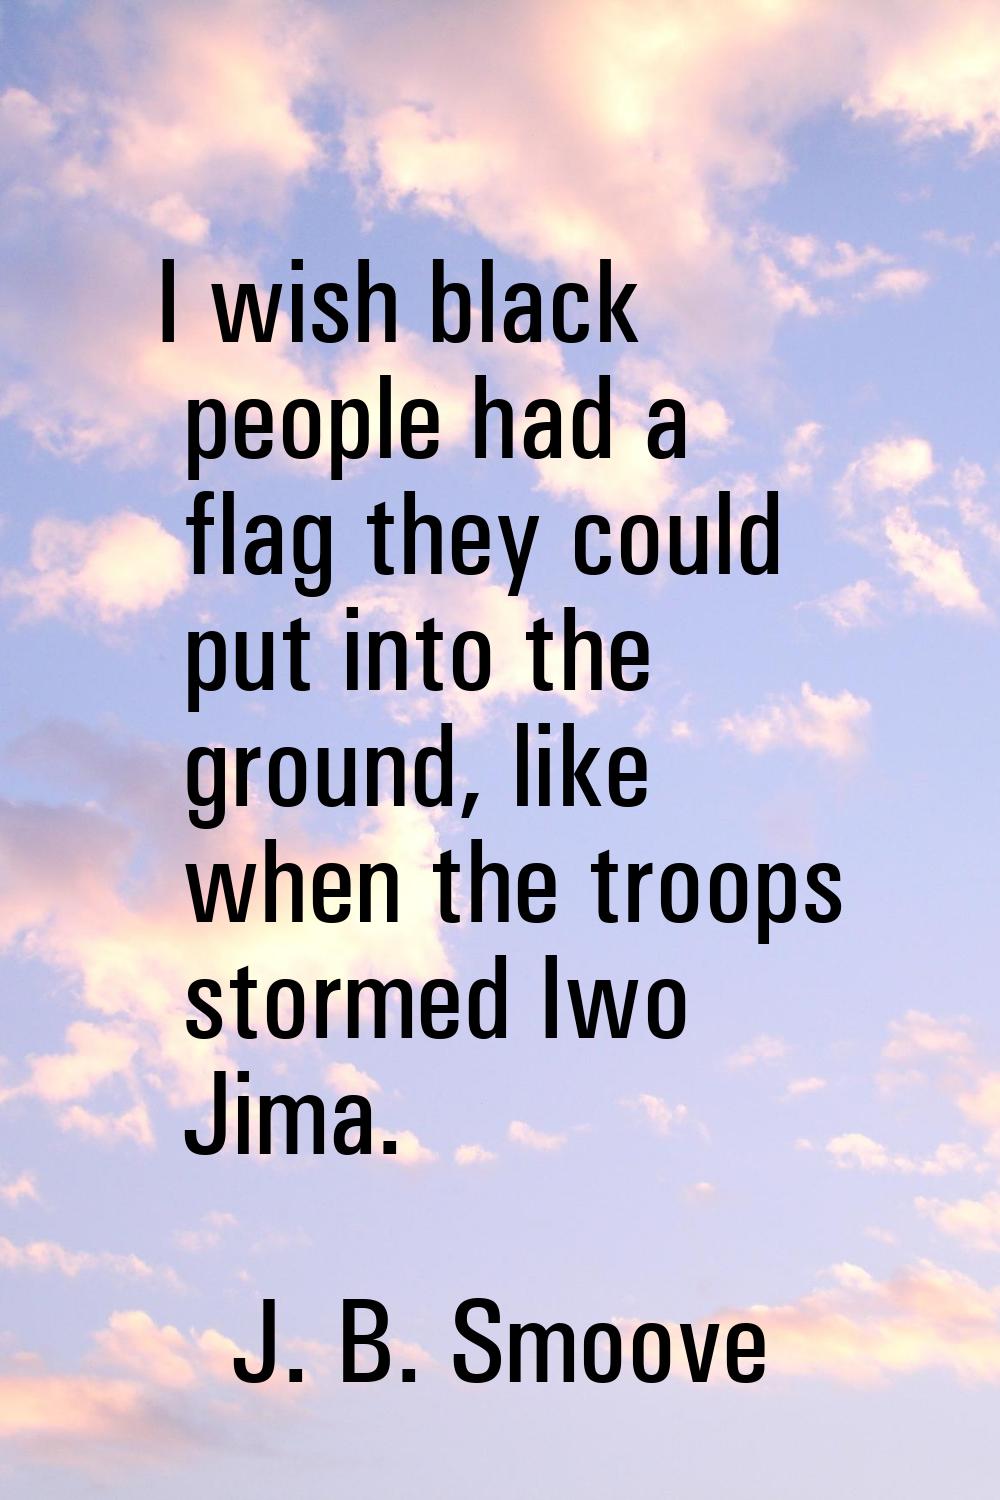 I wish black people had a flag they could put into the ground, like when the troops stormed Iwo Jim